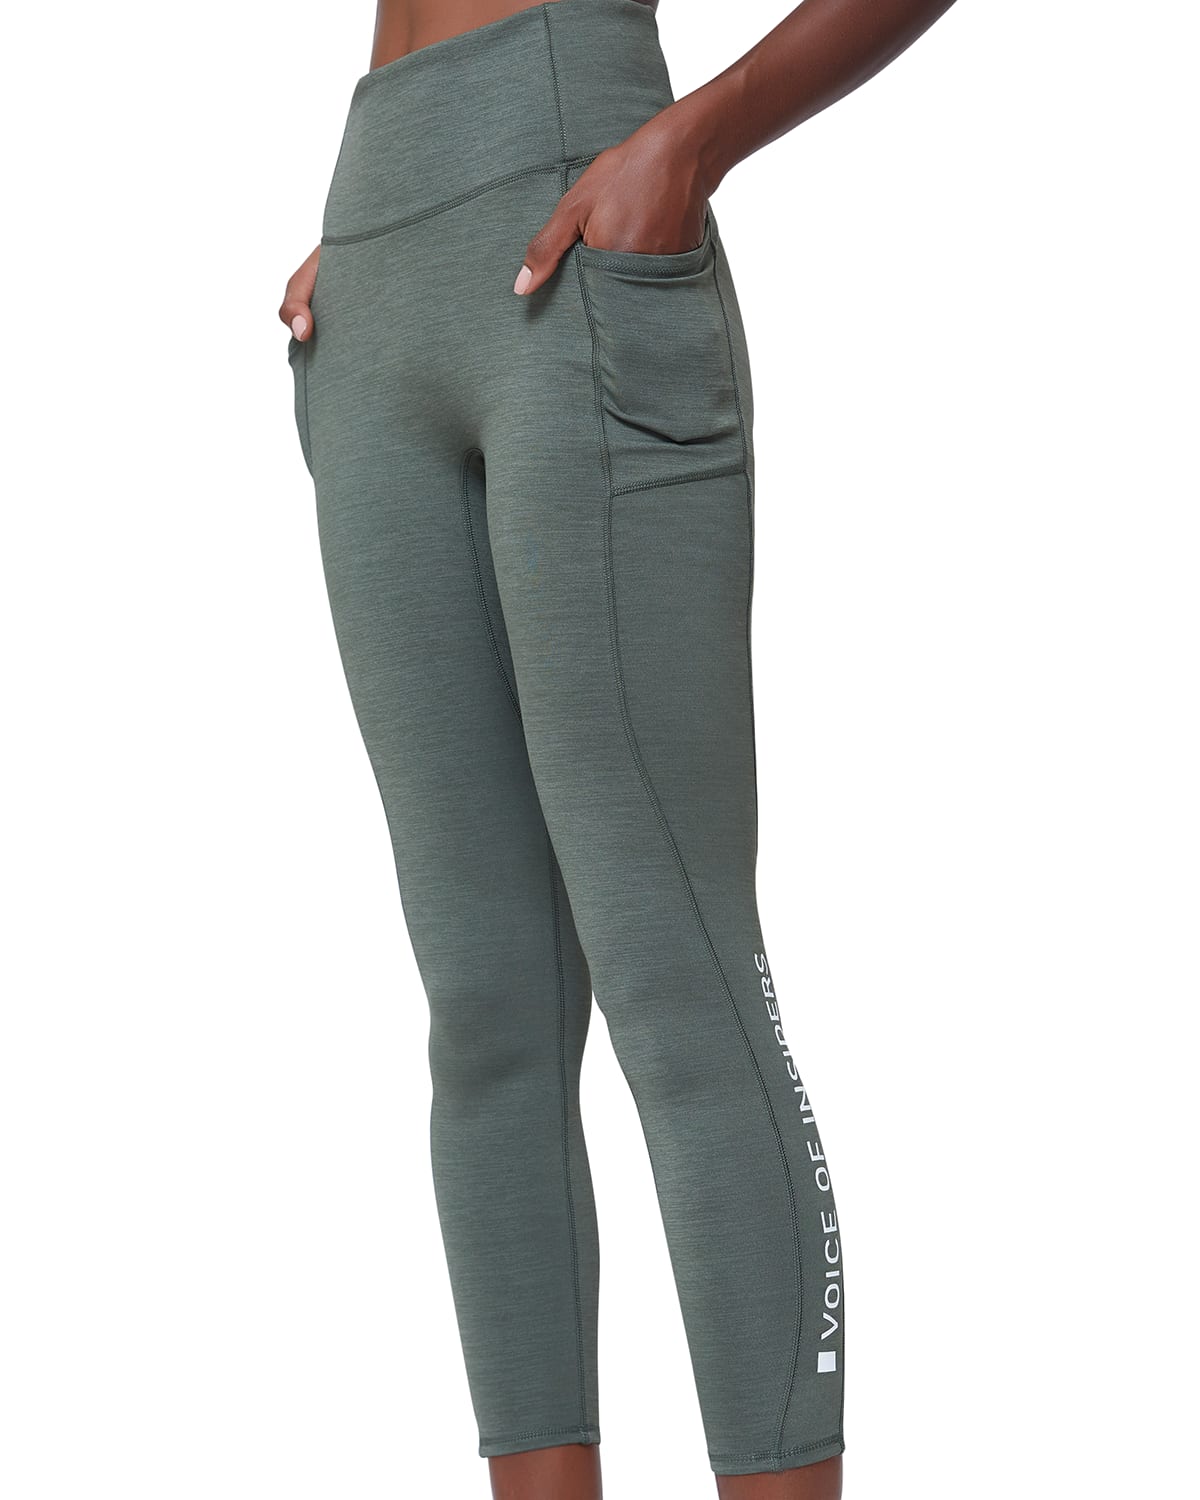 Voice Of Insiders Seacell 7/8 Performance Leggings With Phone Pocket In Green Heather